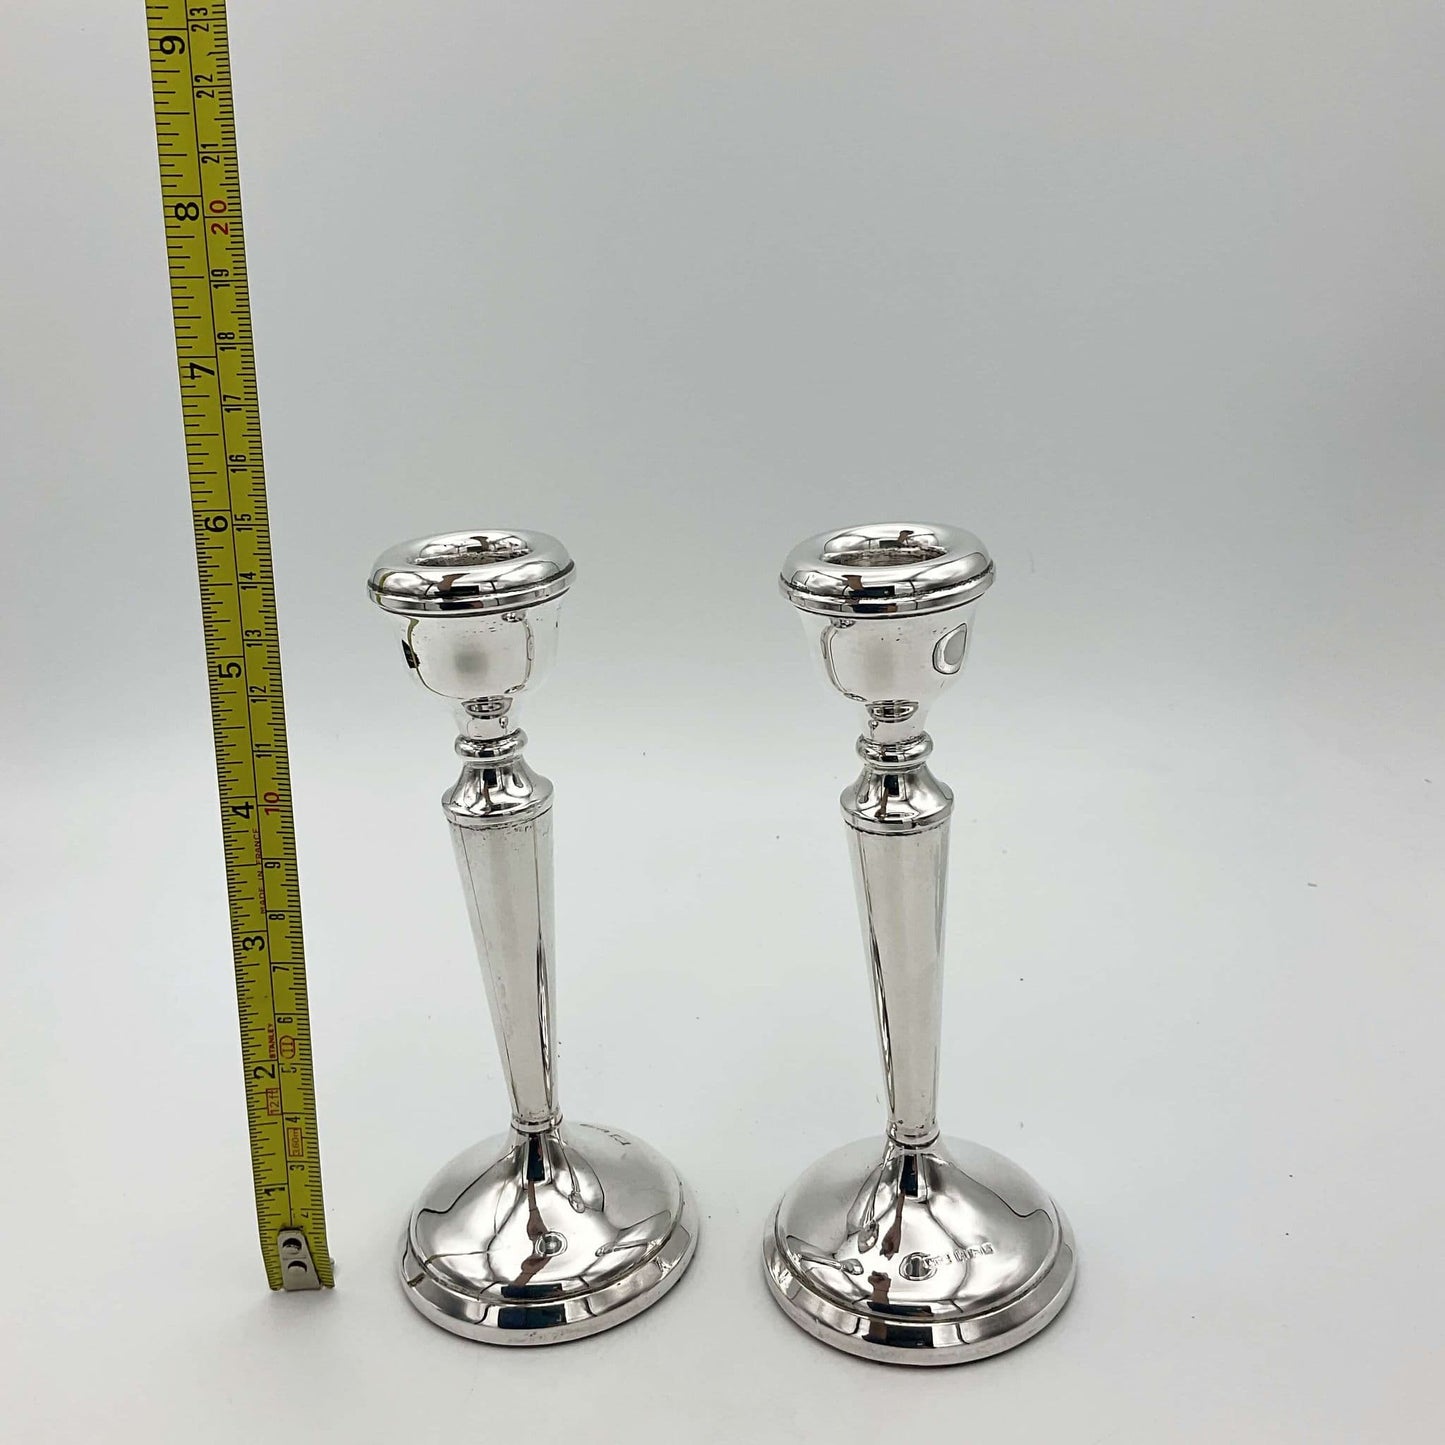 Pair of Silver Candlestick Holders, 1970s Hallmarks